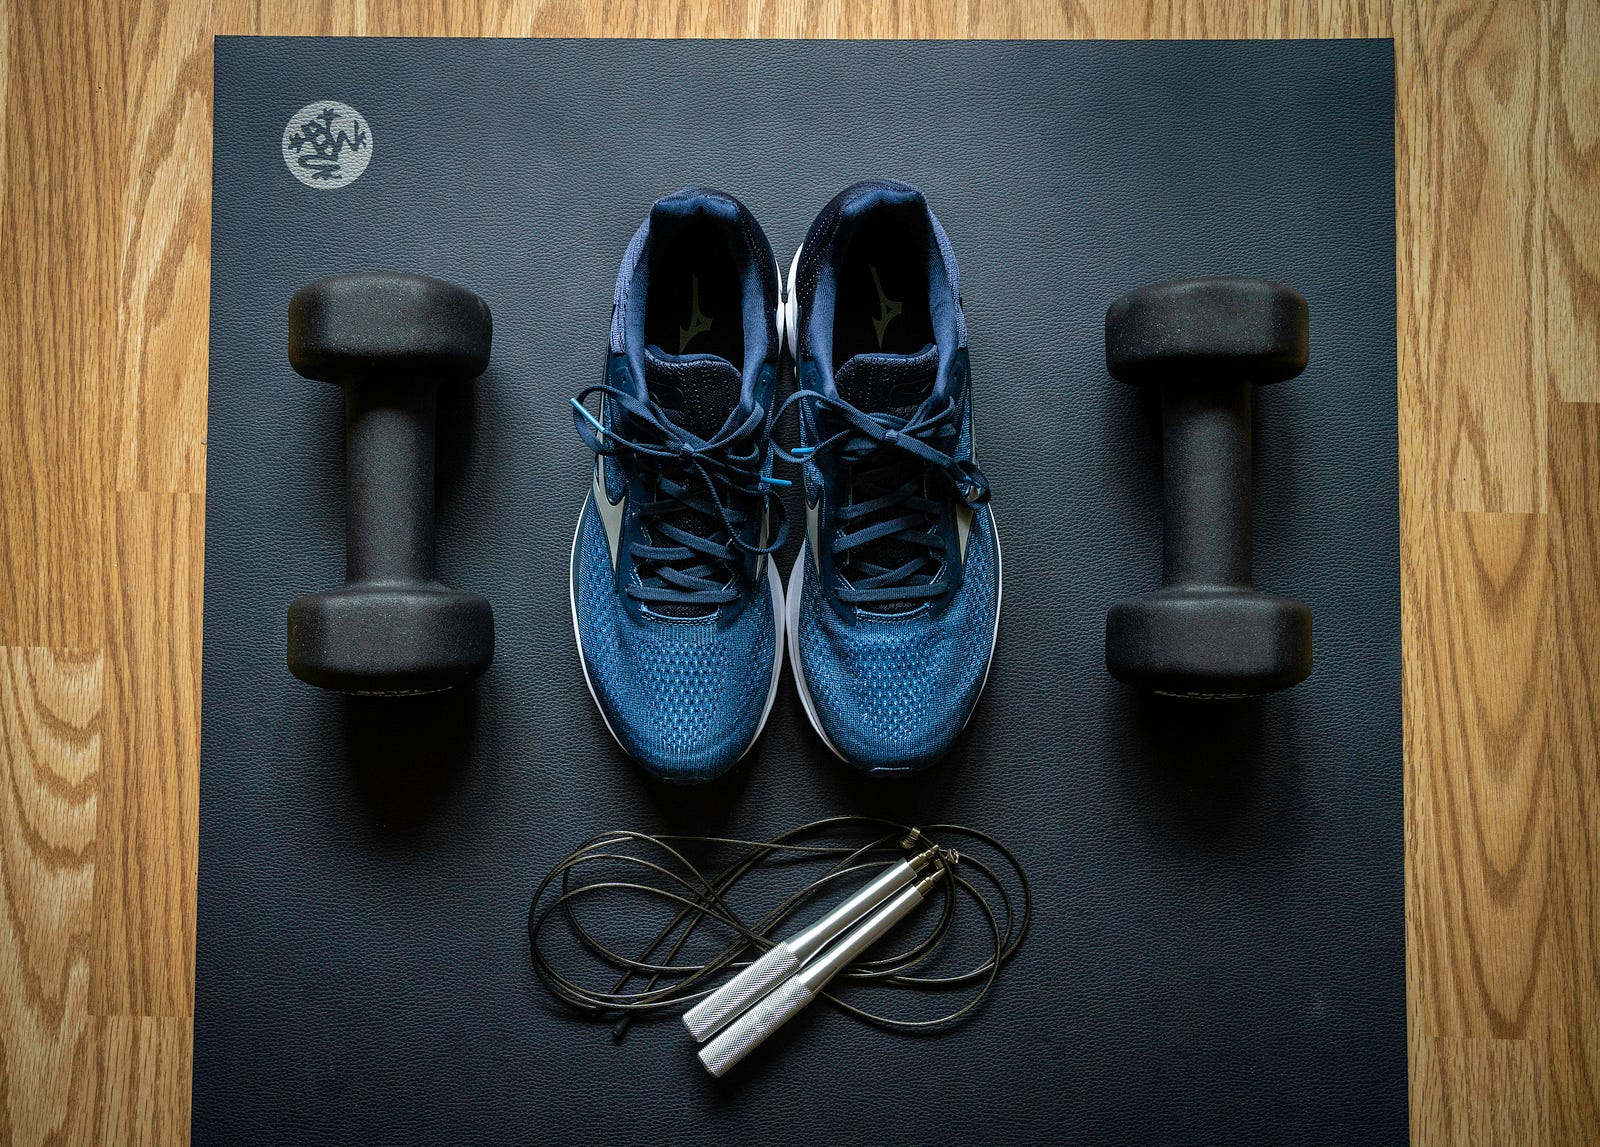 Dumbbells are on either side of a blue pair of sneakers (trainers), with a jump rope in front. We see the objects from above.